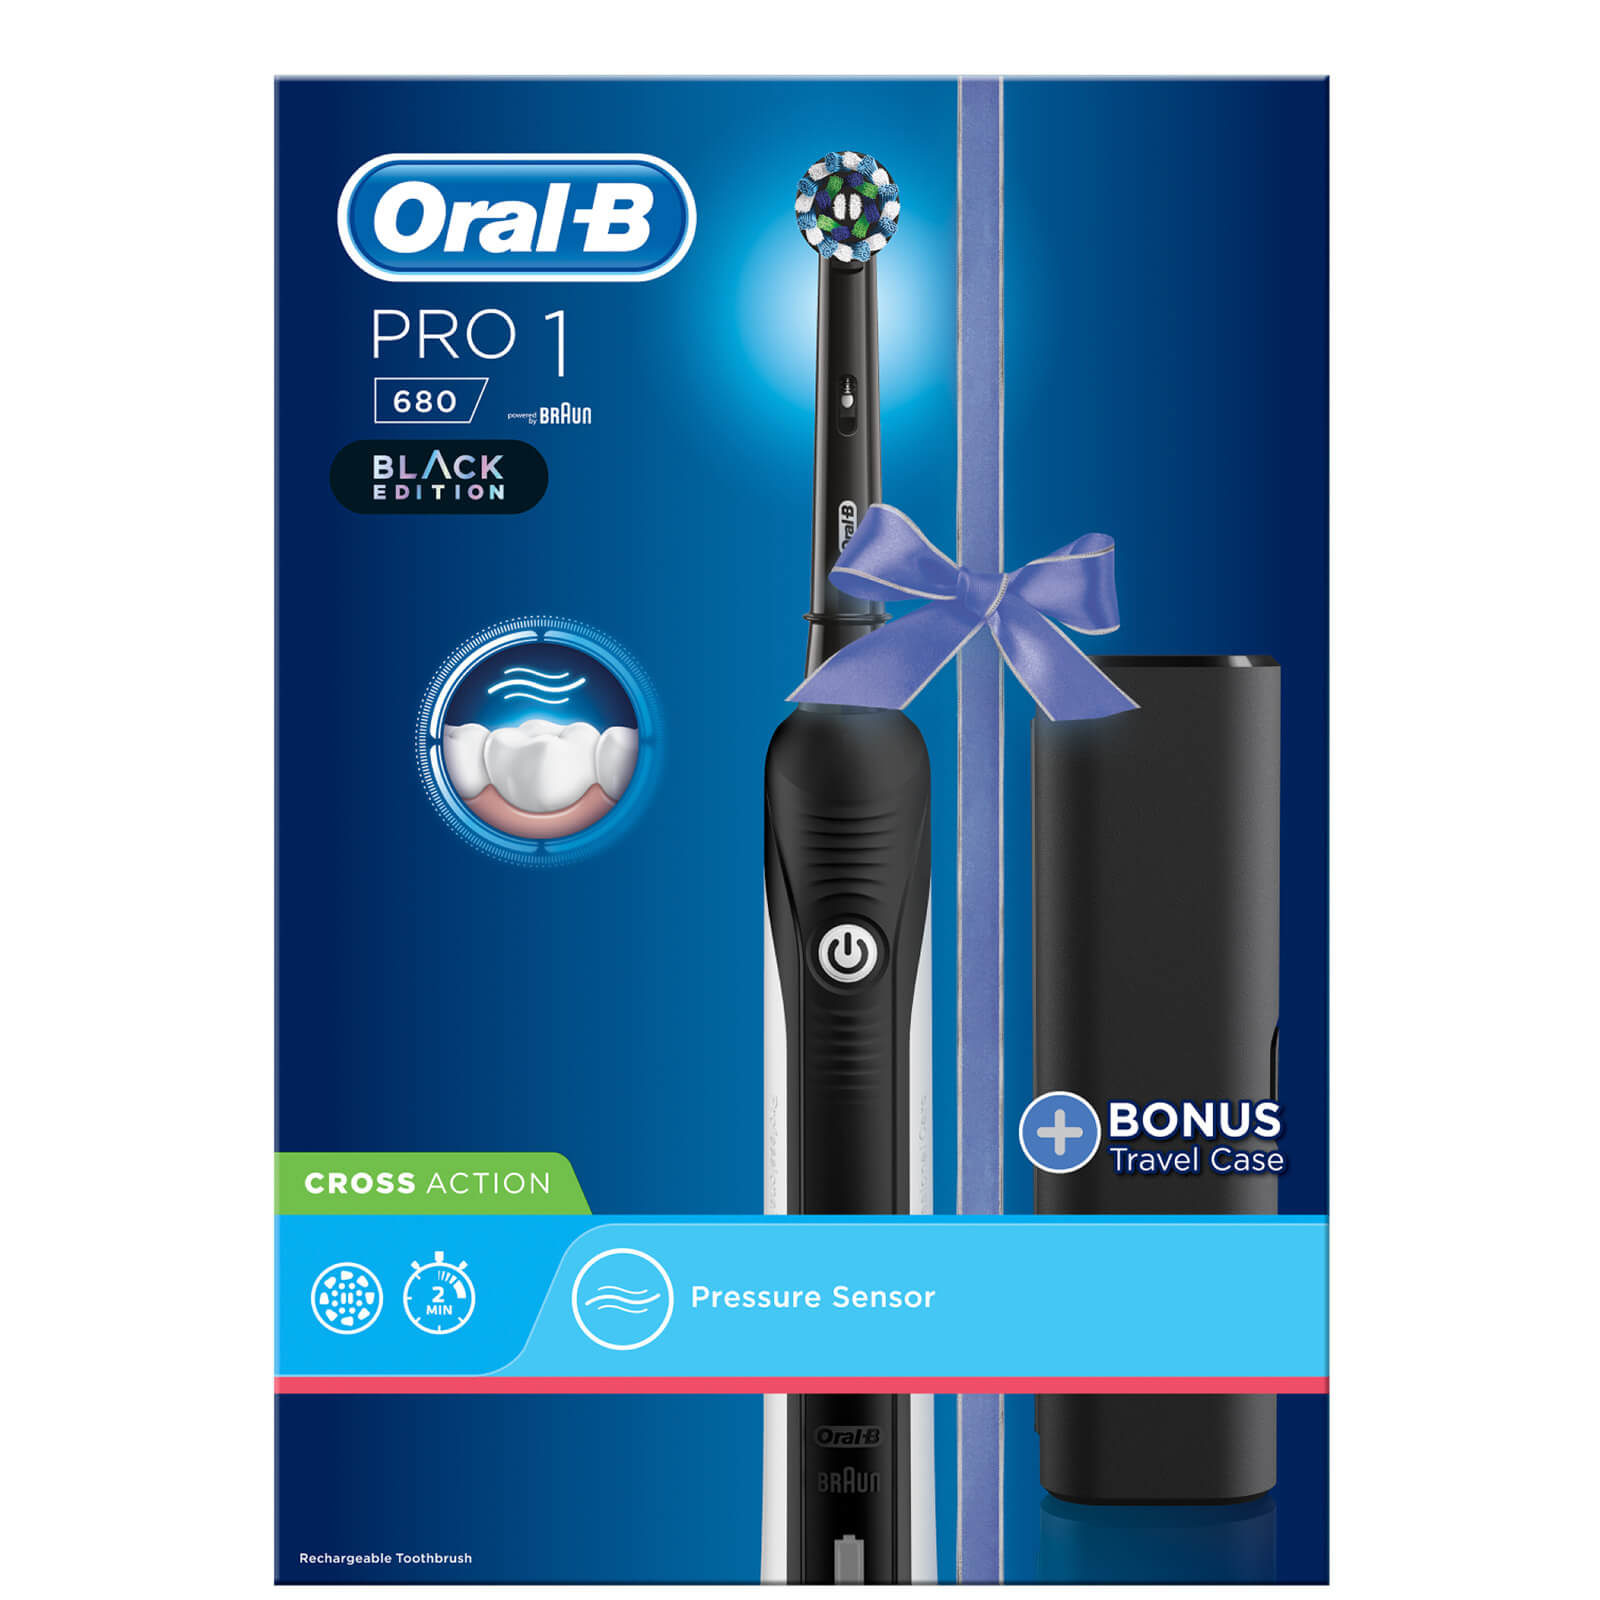 Oral-B Pro 1 680 Electric Toothbrush and Travel Case lookfantastic.com imagine